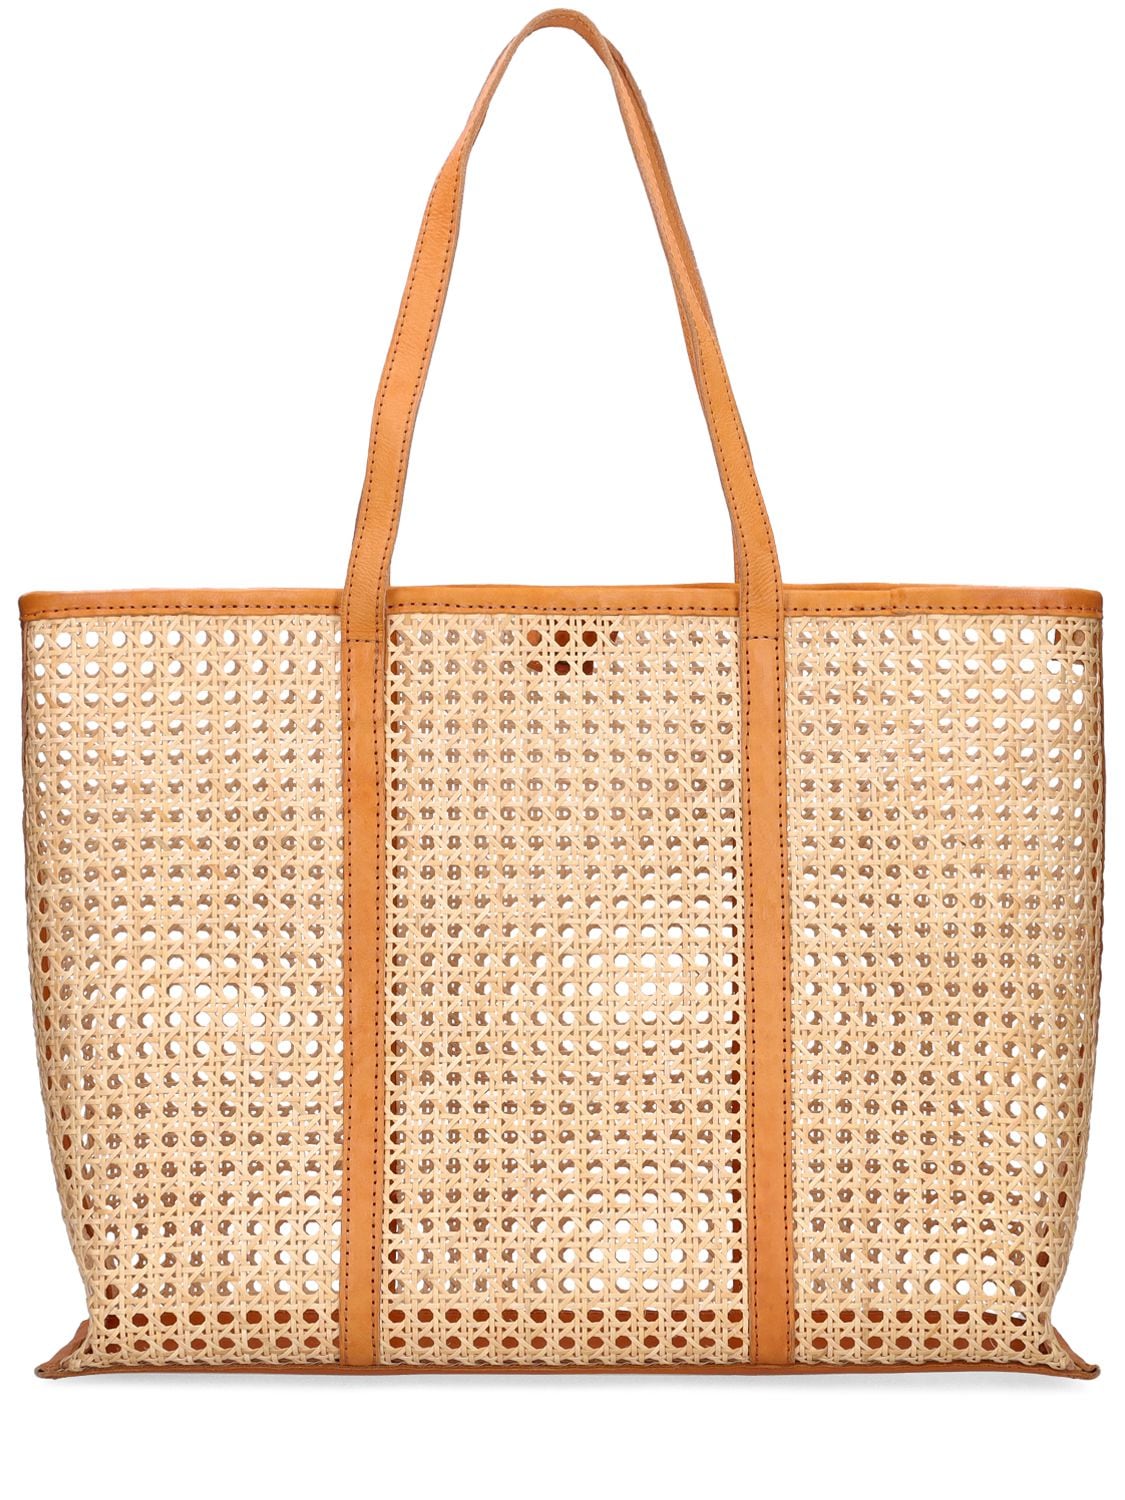 Image of Large Margot Rattan & Leather Tote Bag